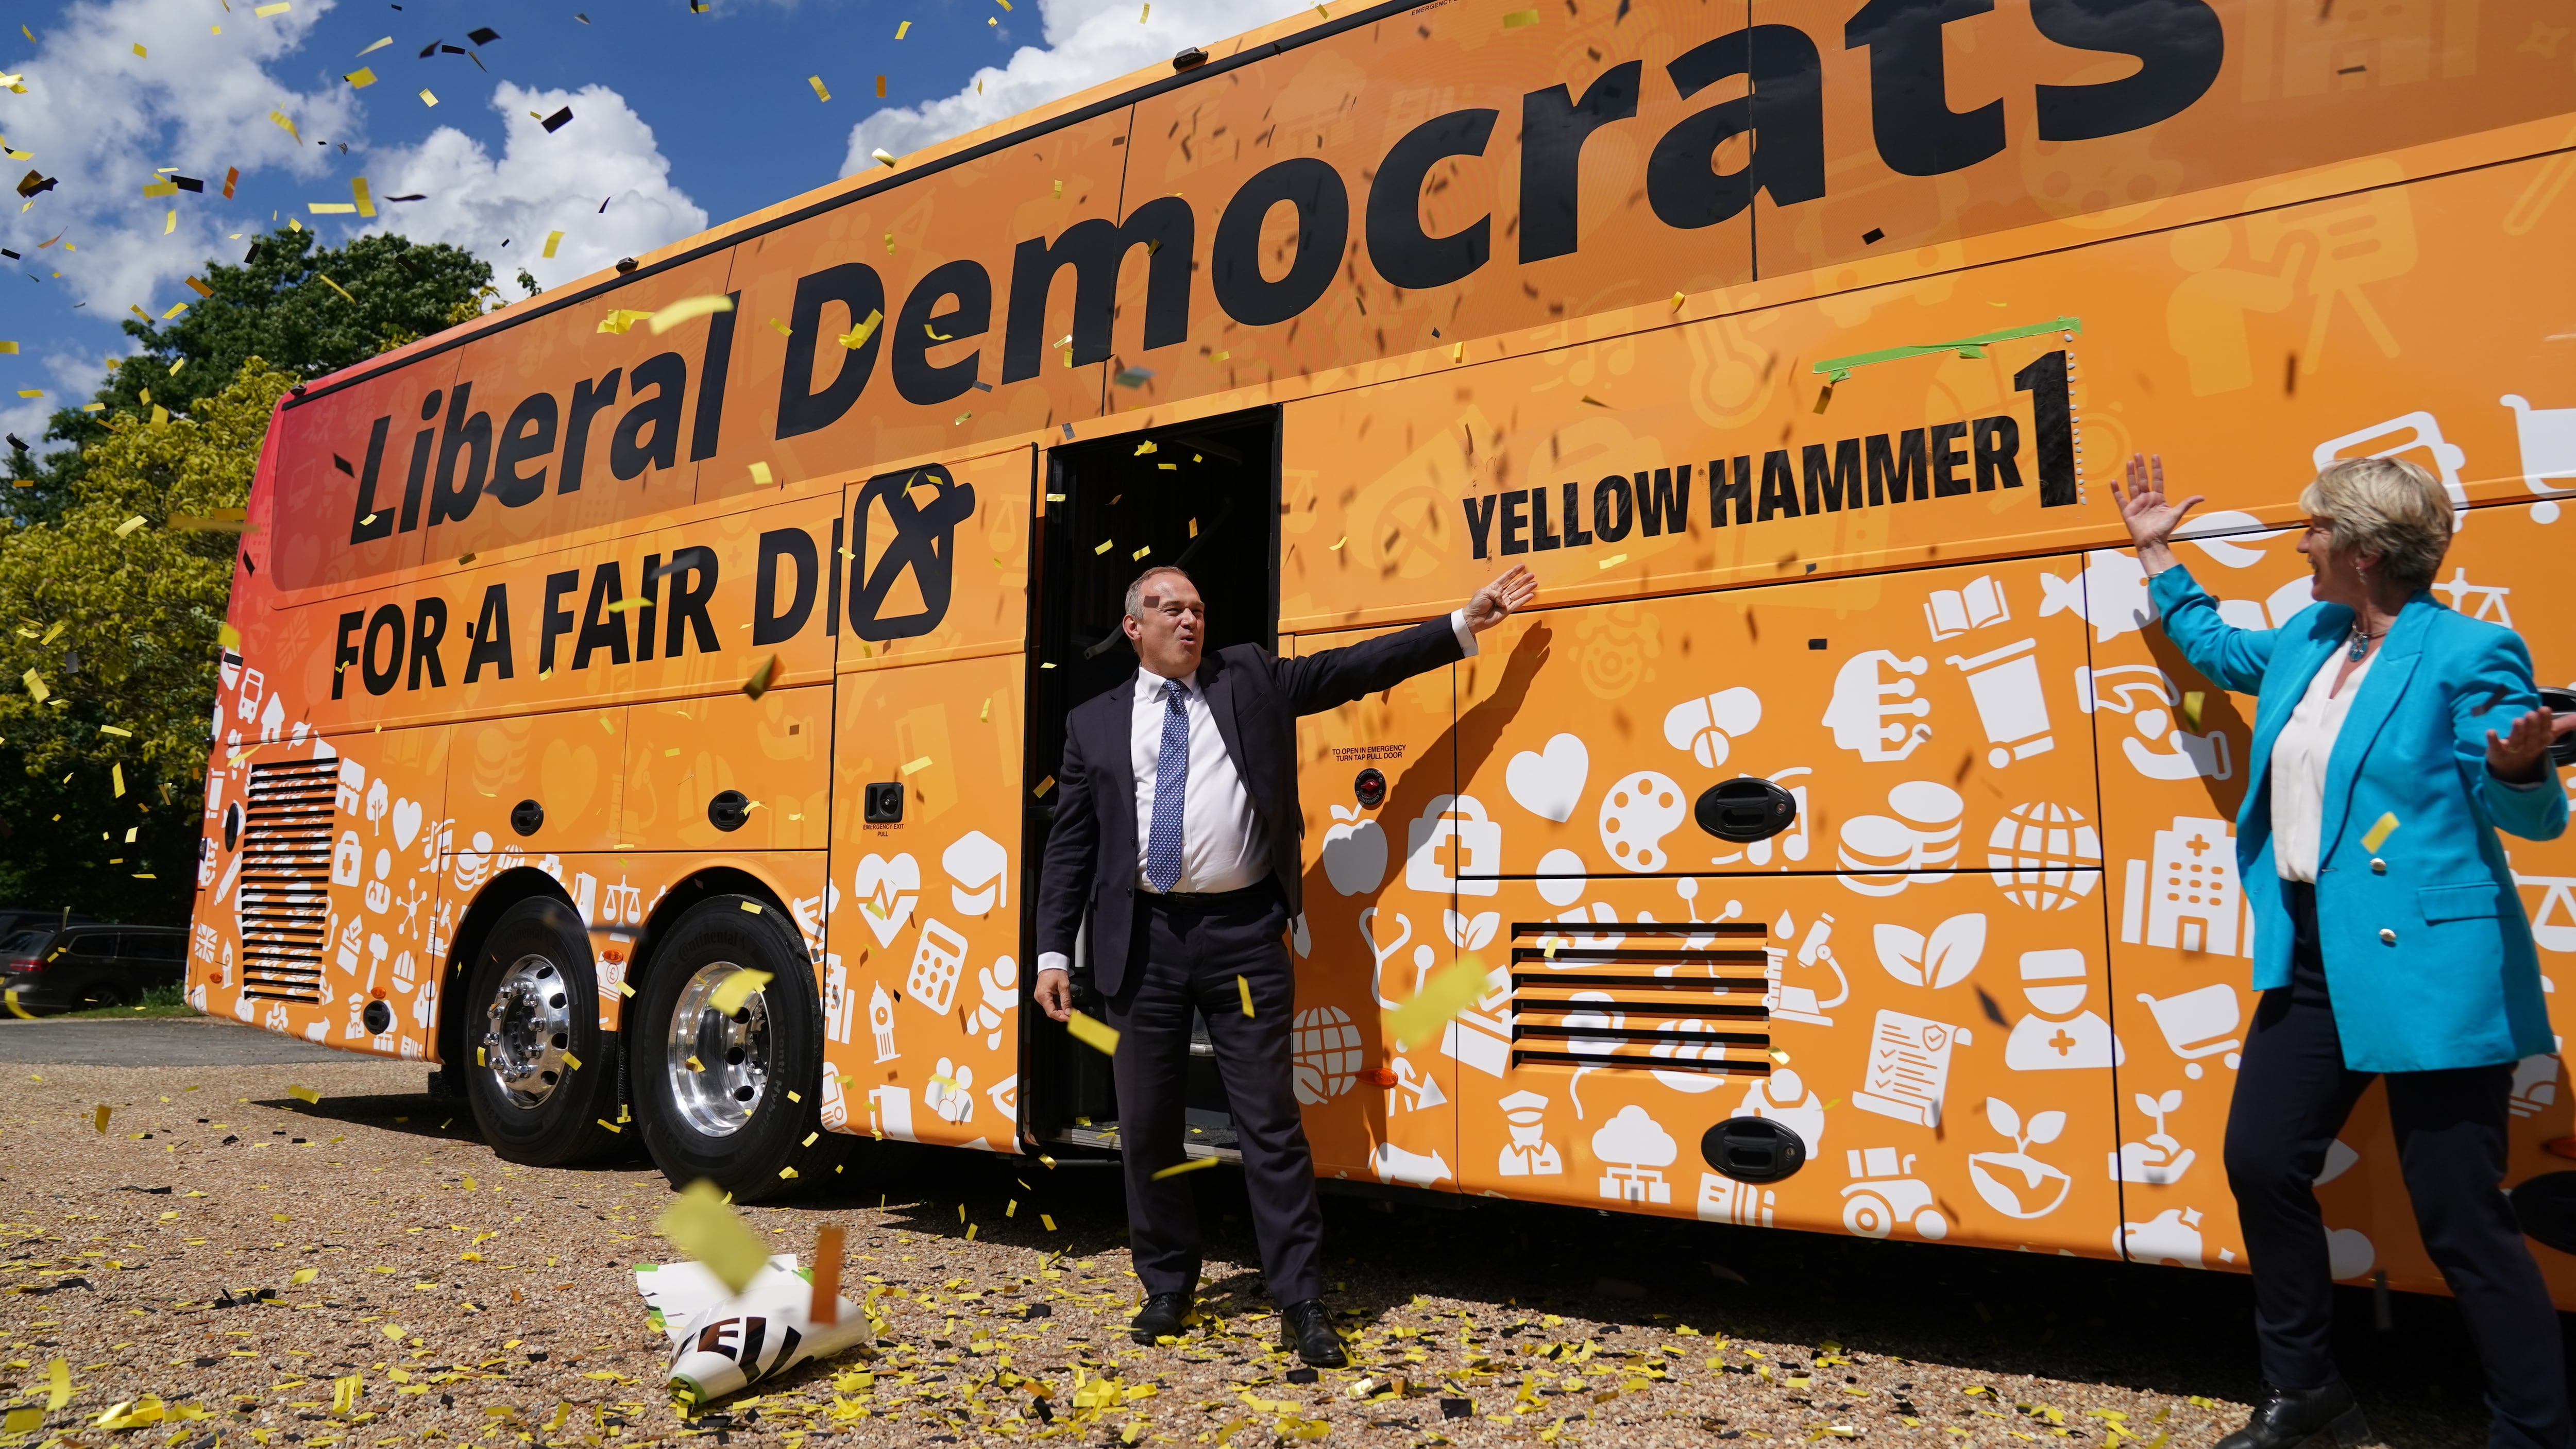 Sir Ed Davey unveiled the new party battlebus at the launch